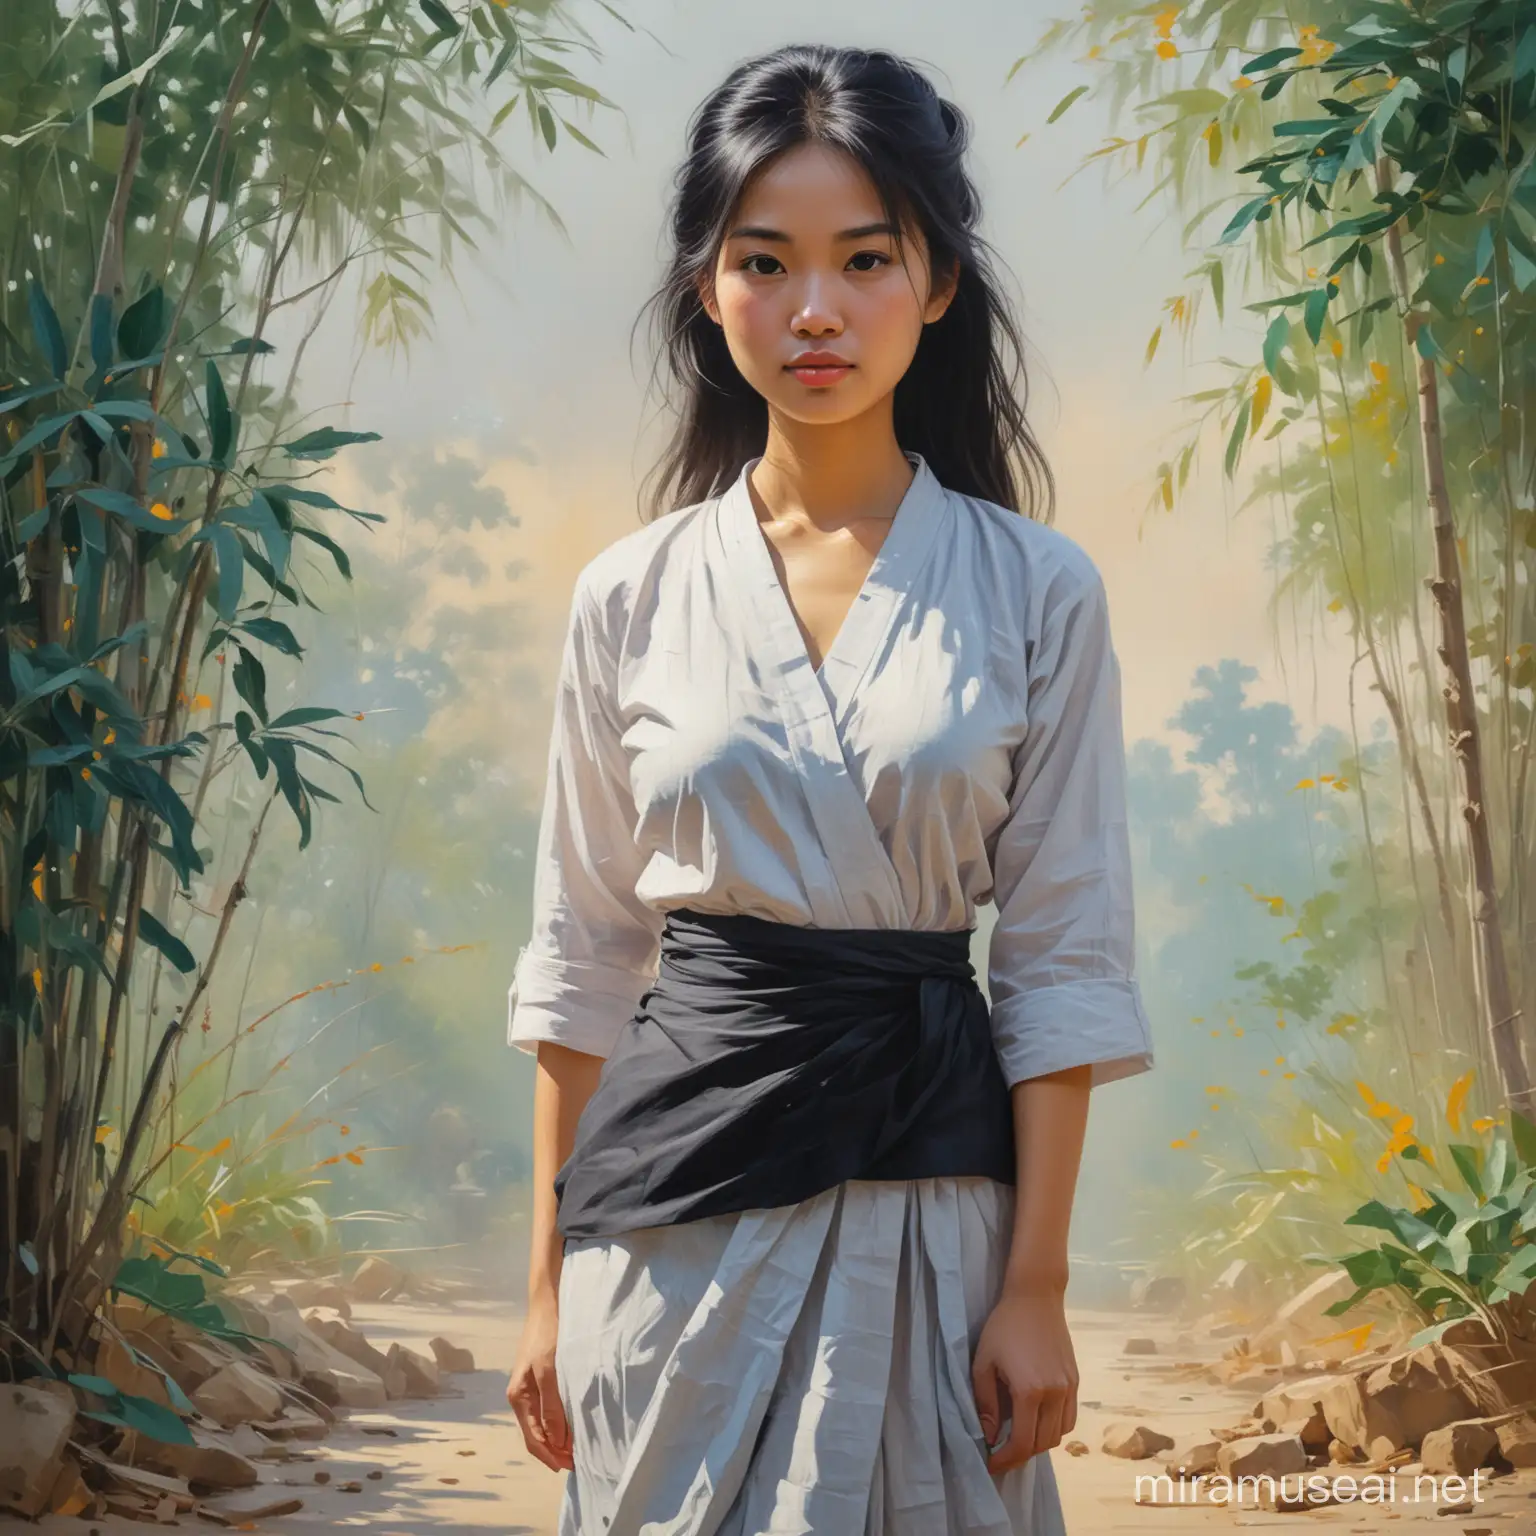 Impressionist Portrait of Petite Vietnamese Woman with Wide Hips and Loose Black Hair